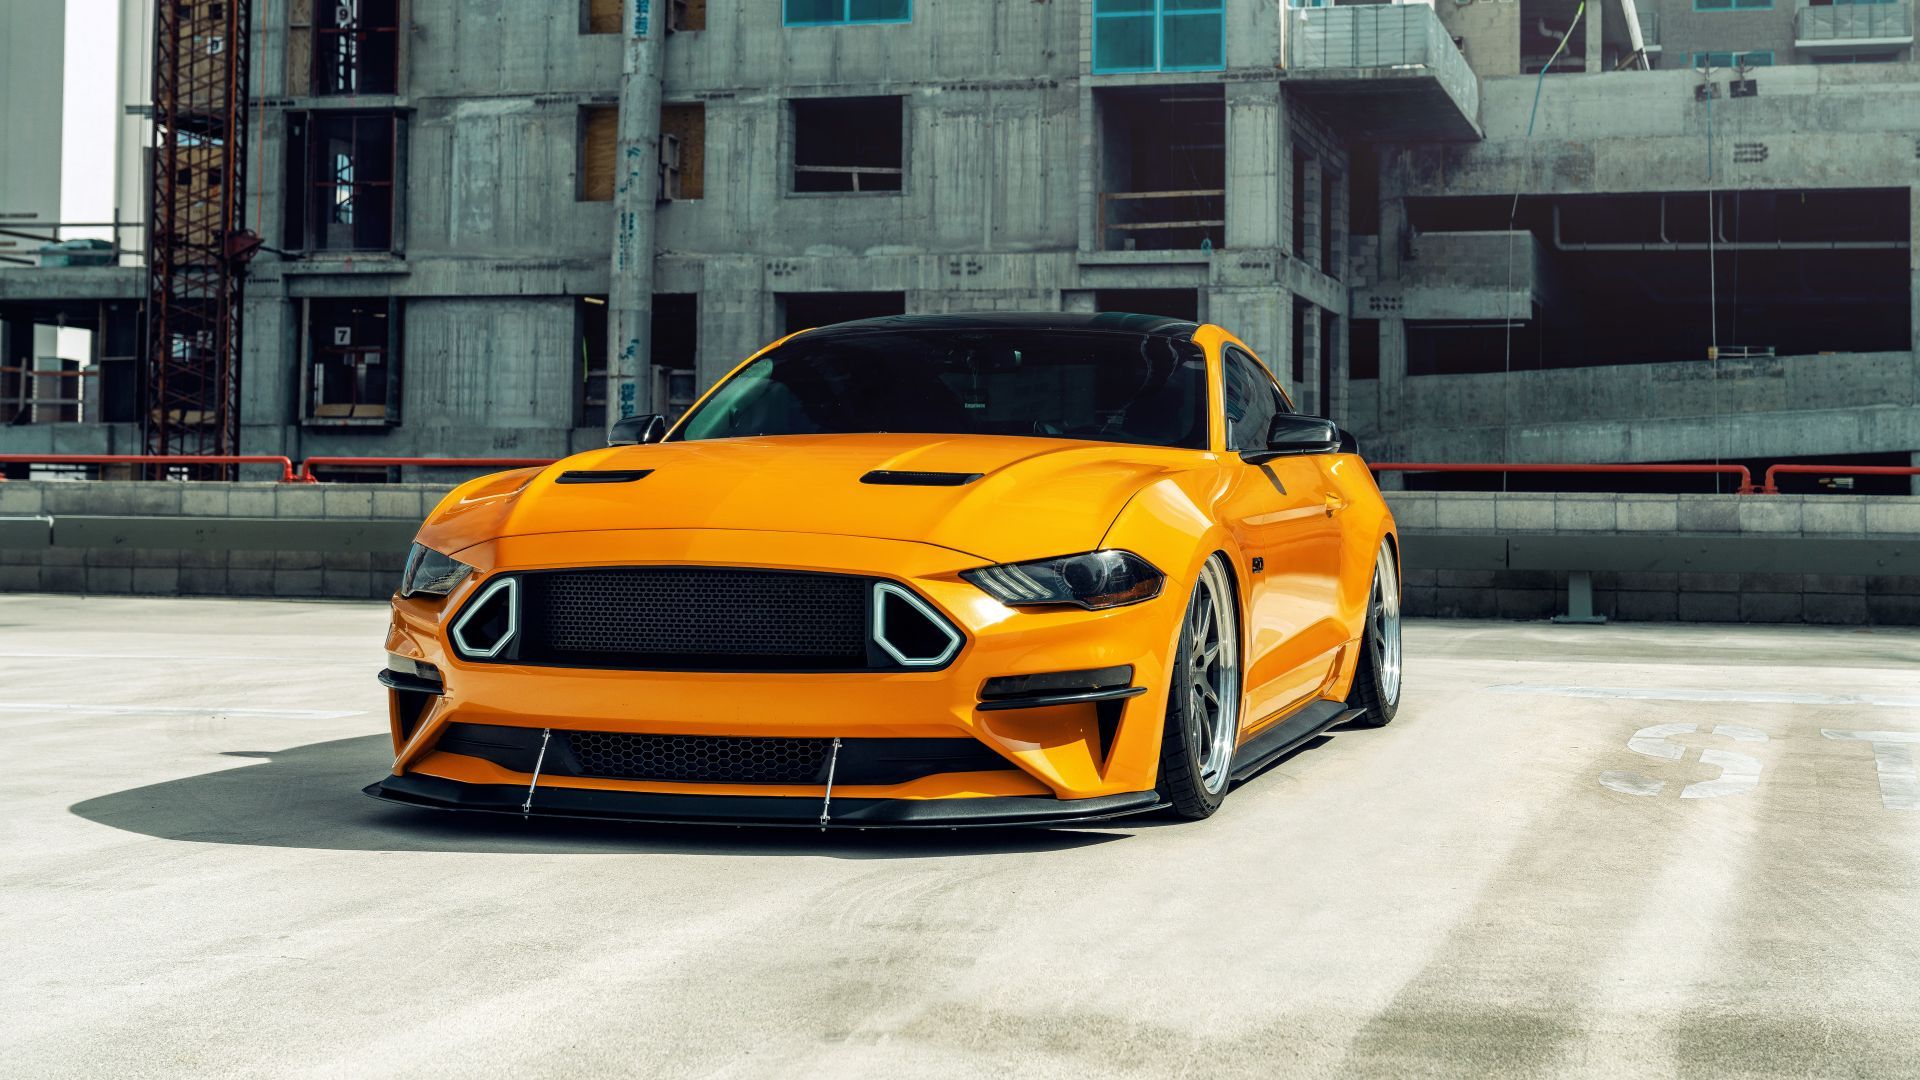 Desktop wallpaper yellow ford mustang gt, HD image, picture, background, ae53cb